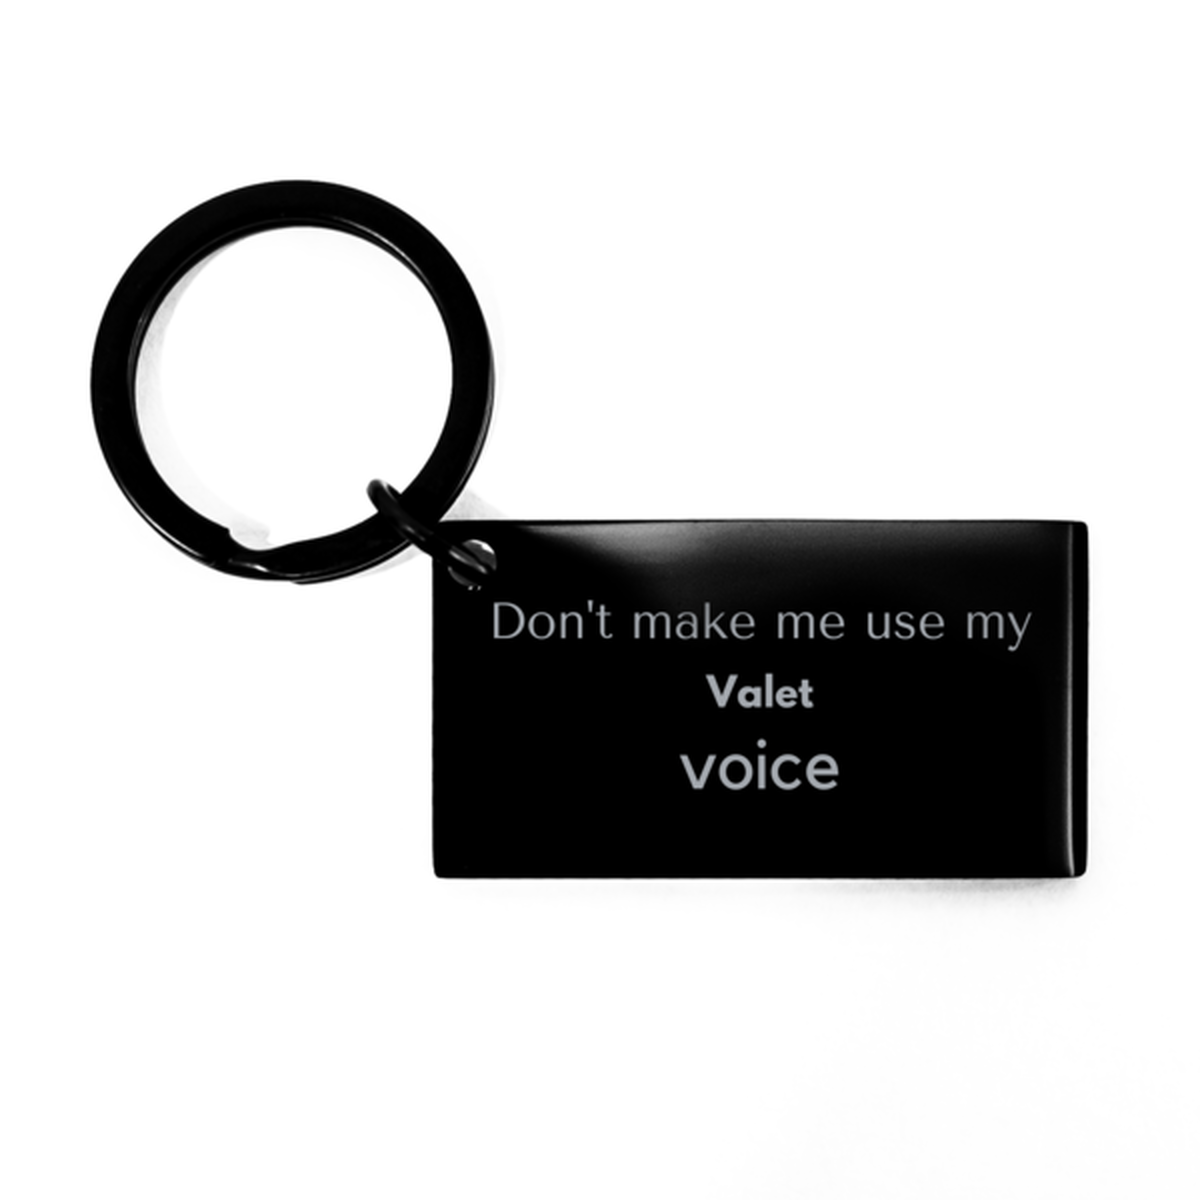 Don't make me use my Valet voice, Sarcasm Valet Gifts, Christmas Valet Keychain Birthday Unique Gifts For Valet Coworkers, Men, Women, Colleague, Friends